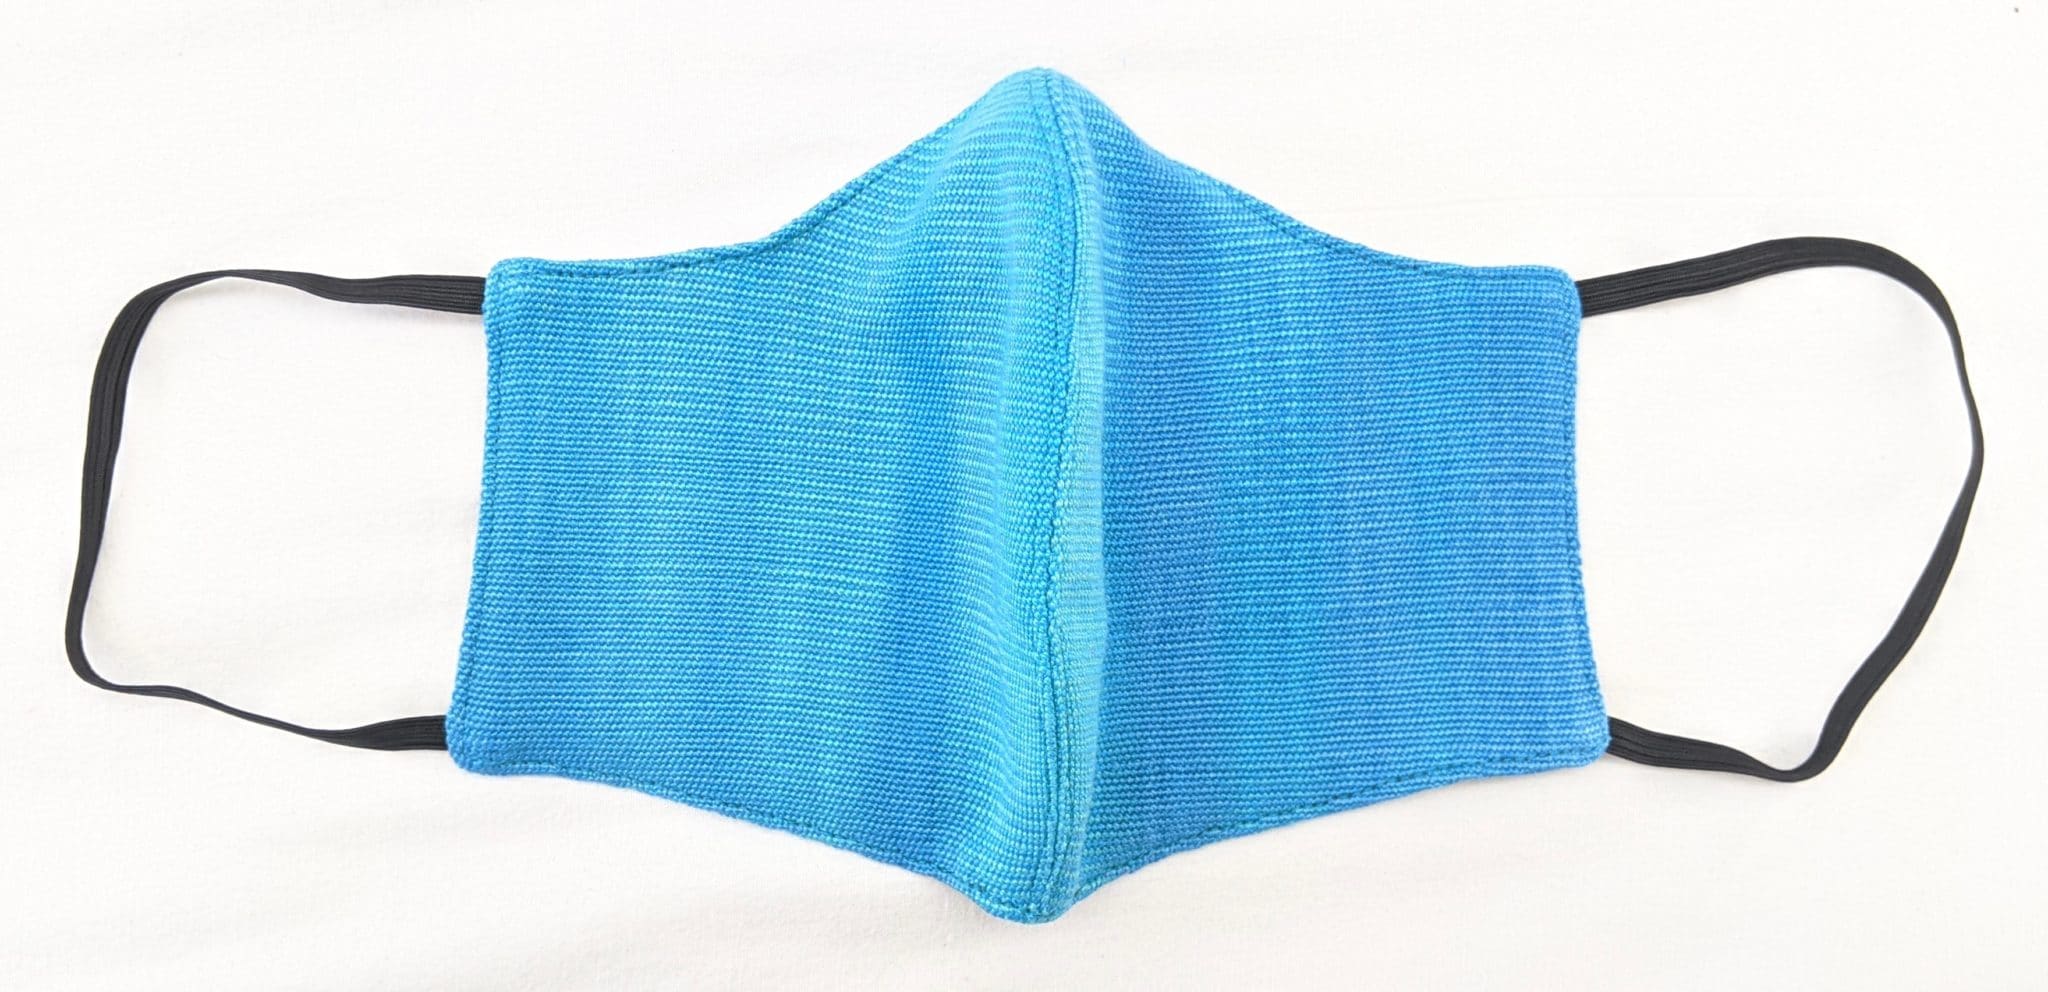 Handwoven Lightweight Bamboo Face Mask with Elastic Behind Ears - Turquoise, Celestial Blues